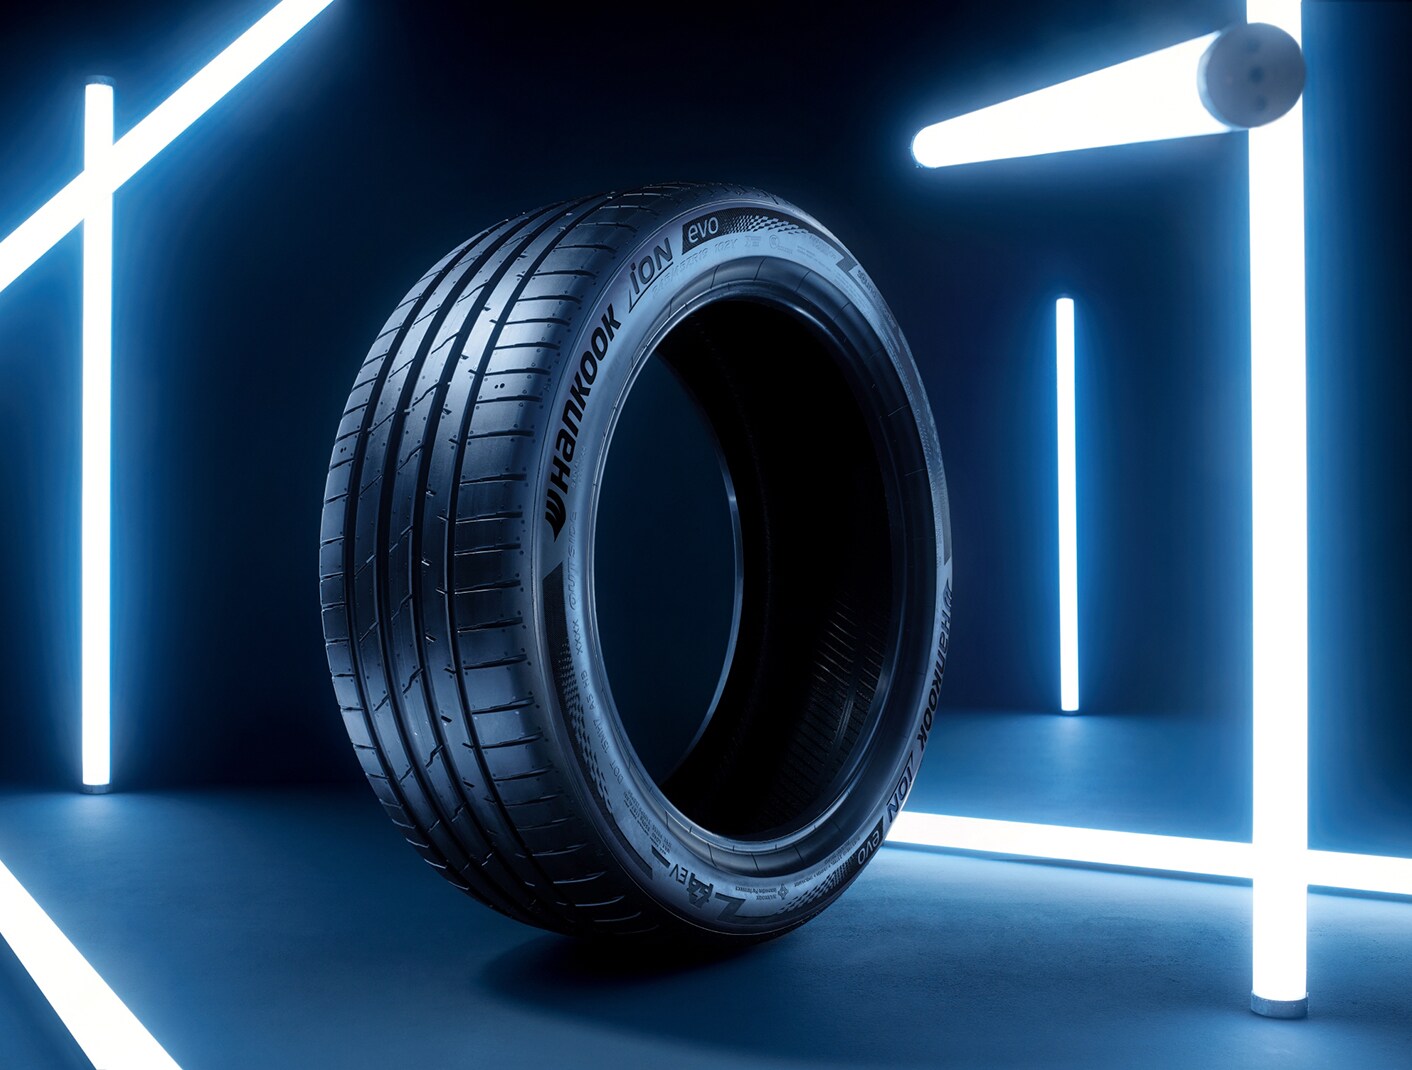 Hankook Tire introduces new technology system for EV-exclusive tire brand ‘iON’